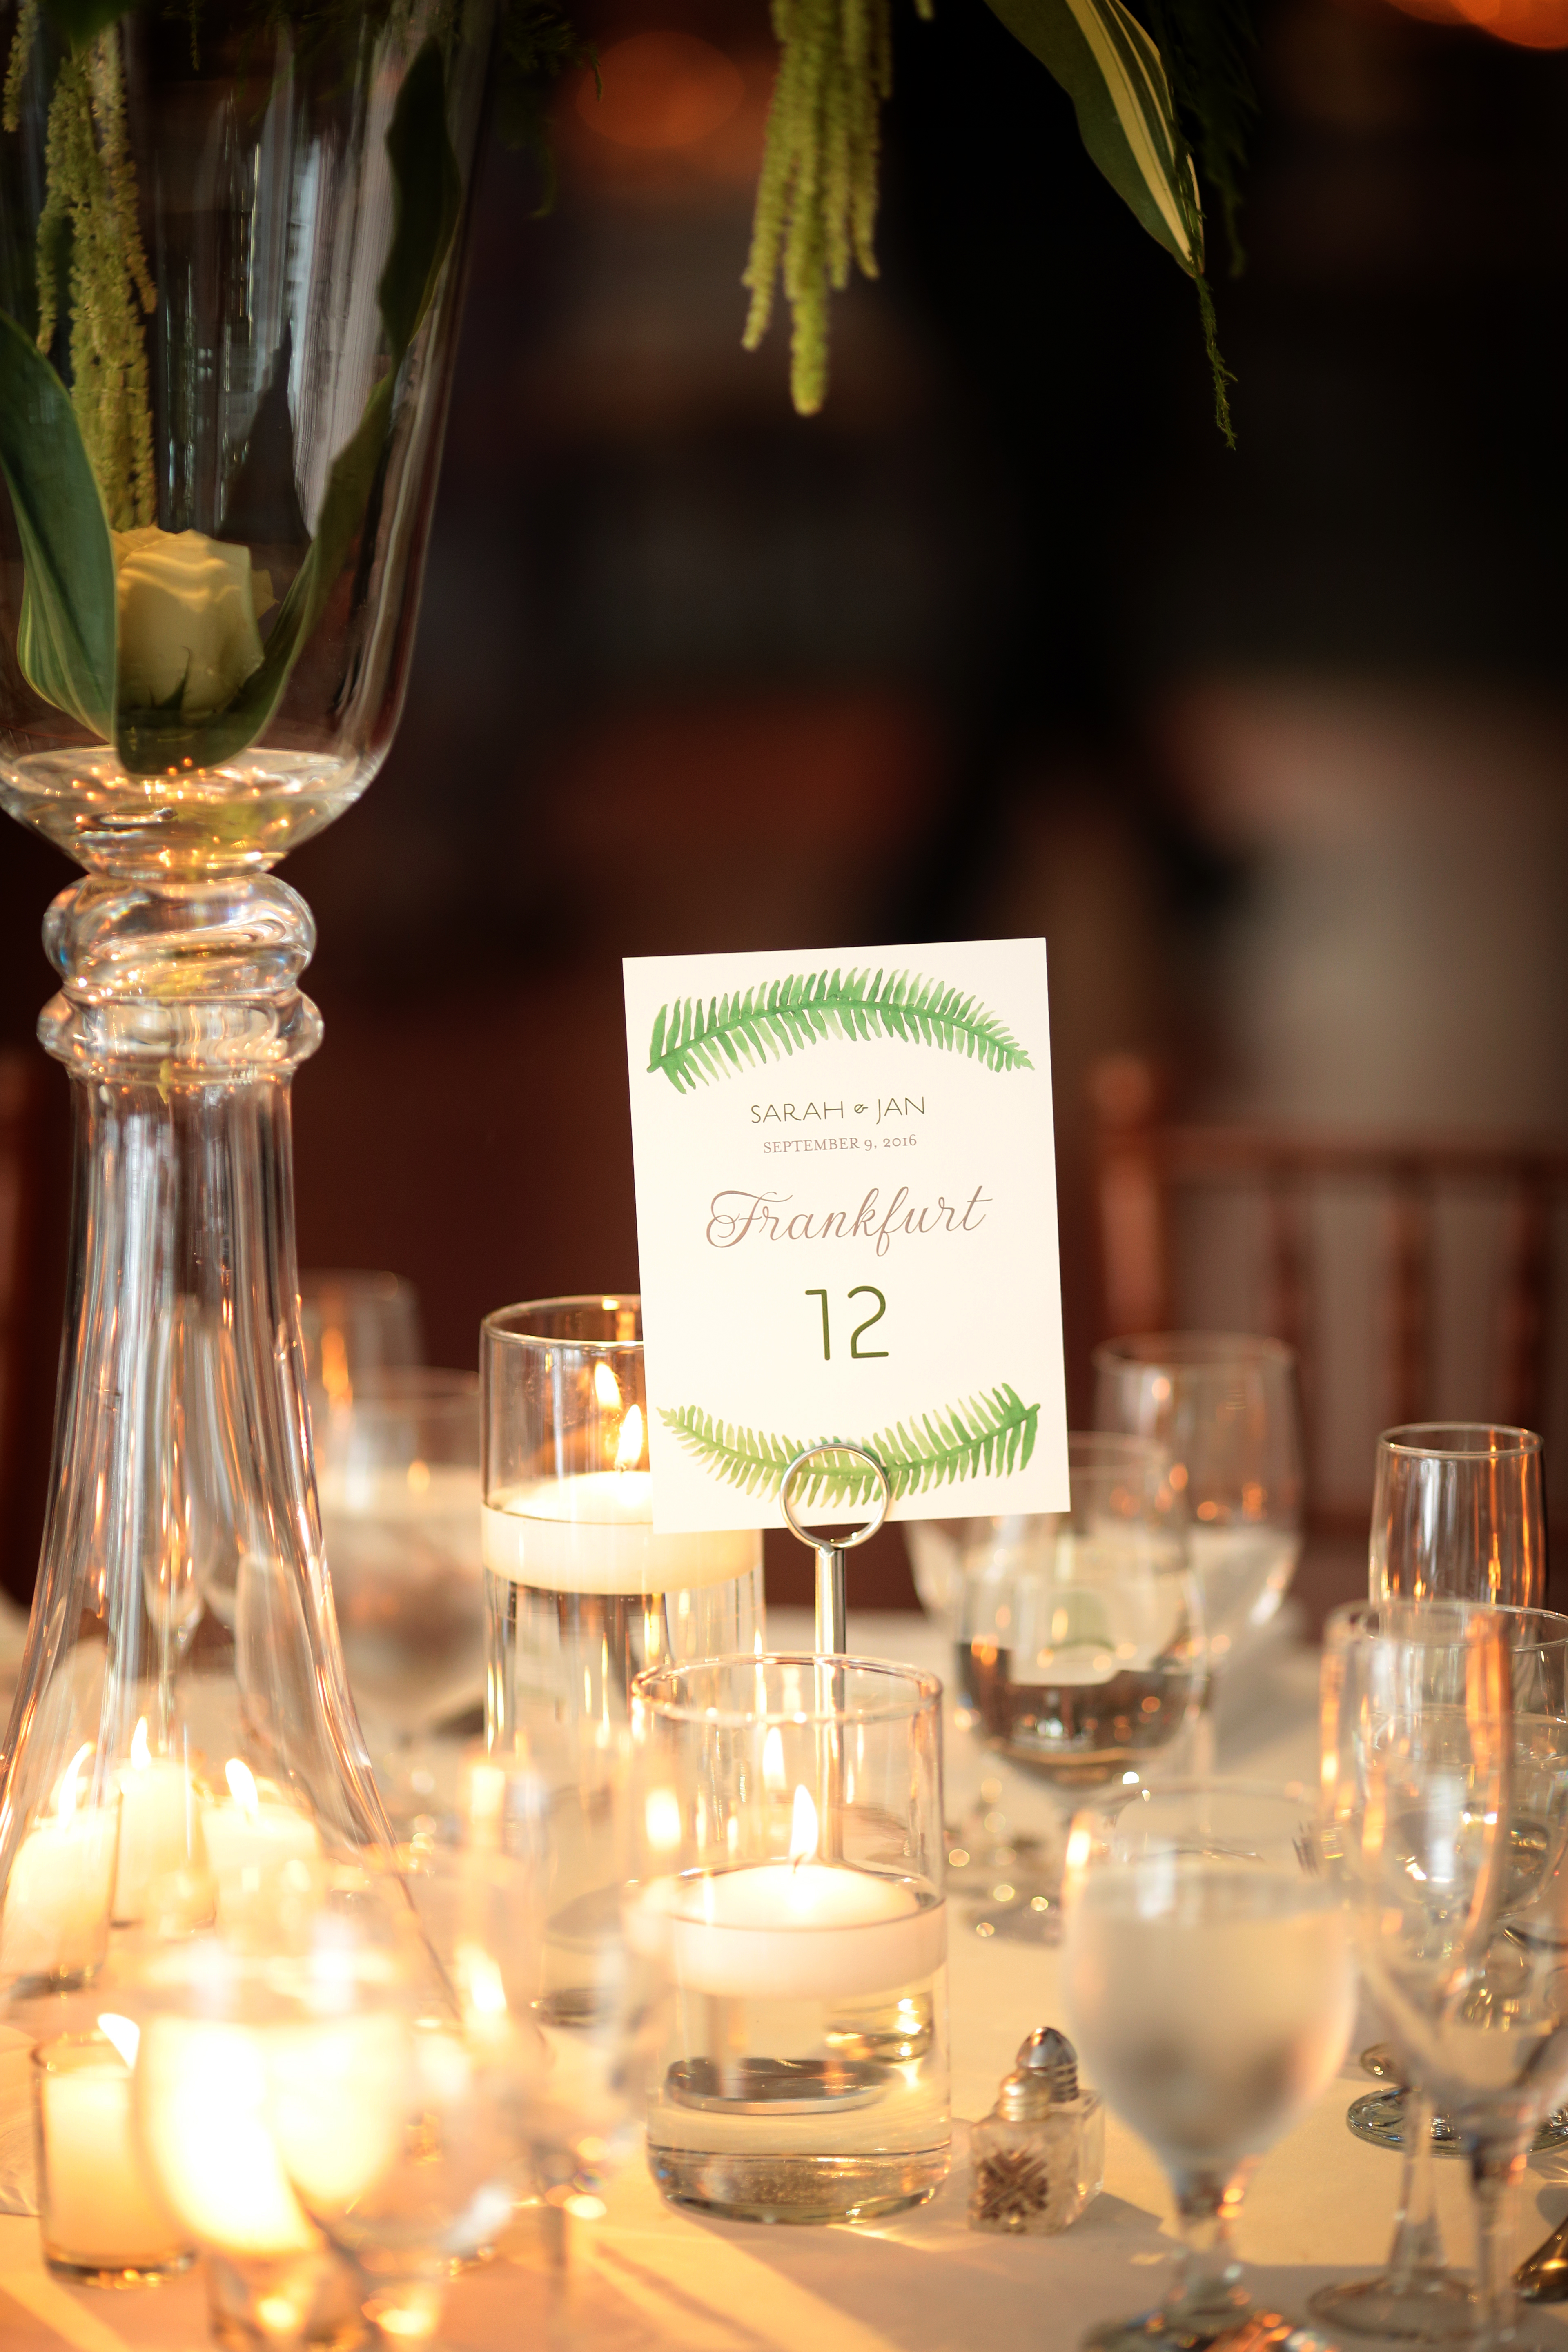 We incorporated greenery into the table names at this New York Botanical Garden Wedding for an added special touch!